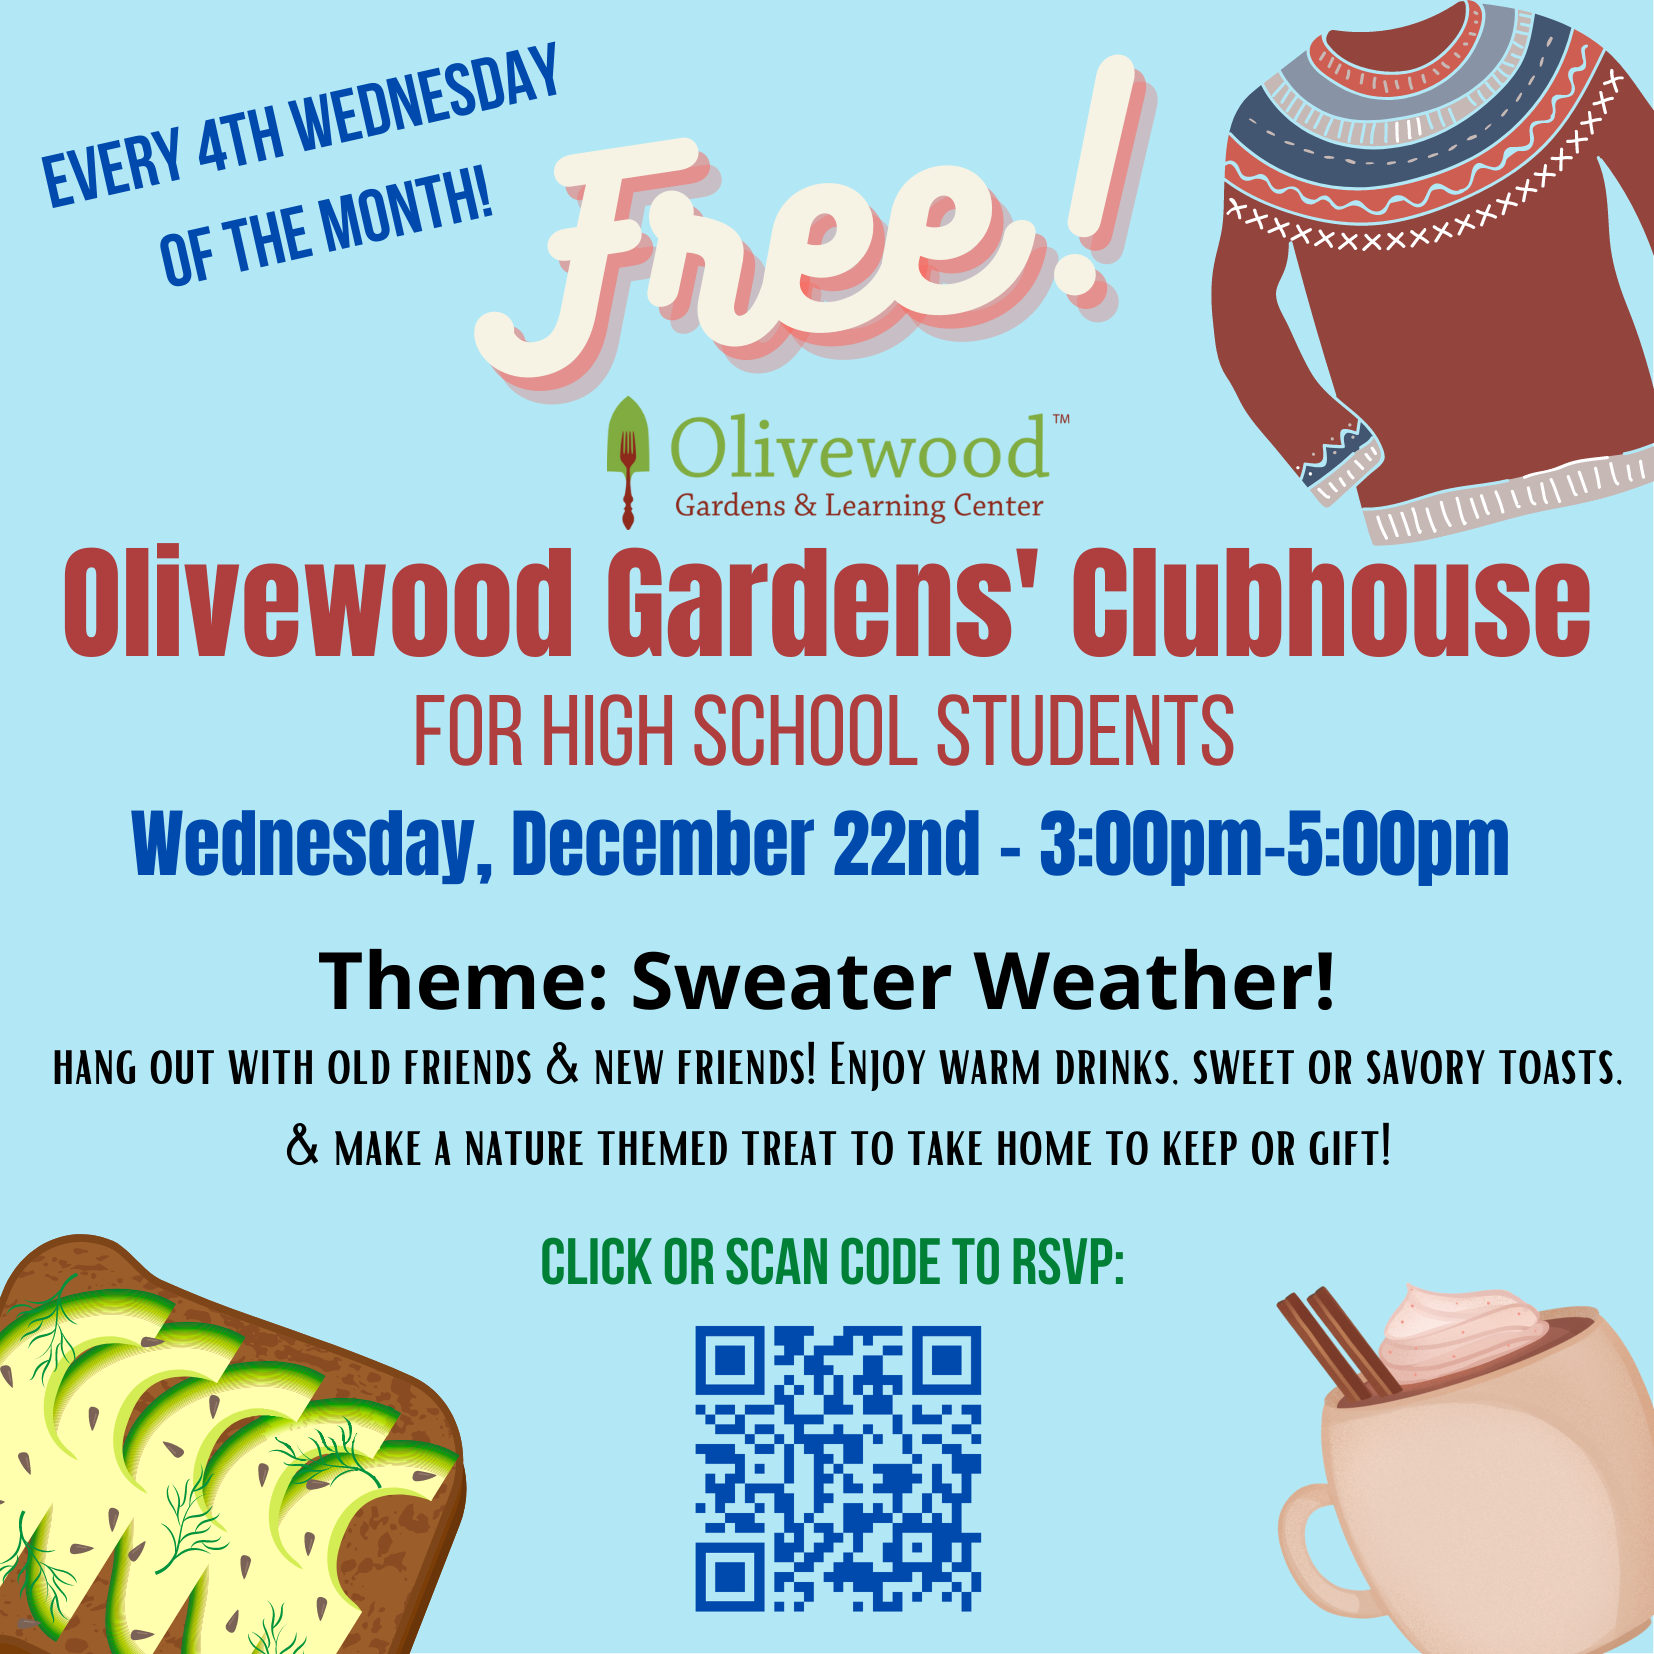 Olivewood Gardens' December Clubhouse